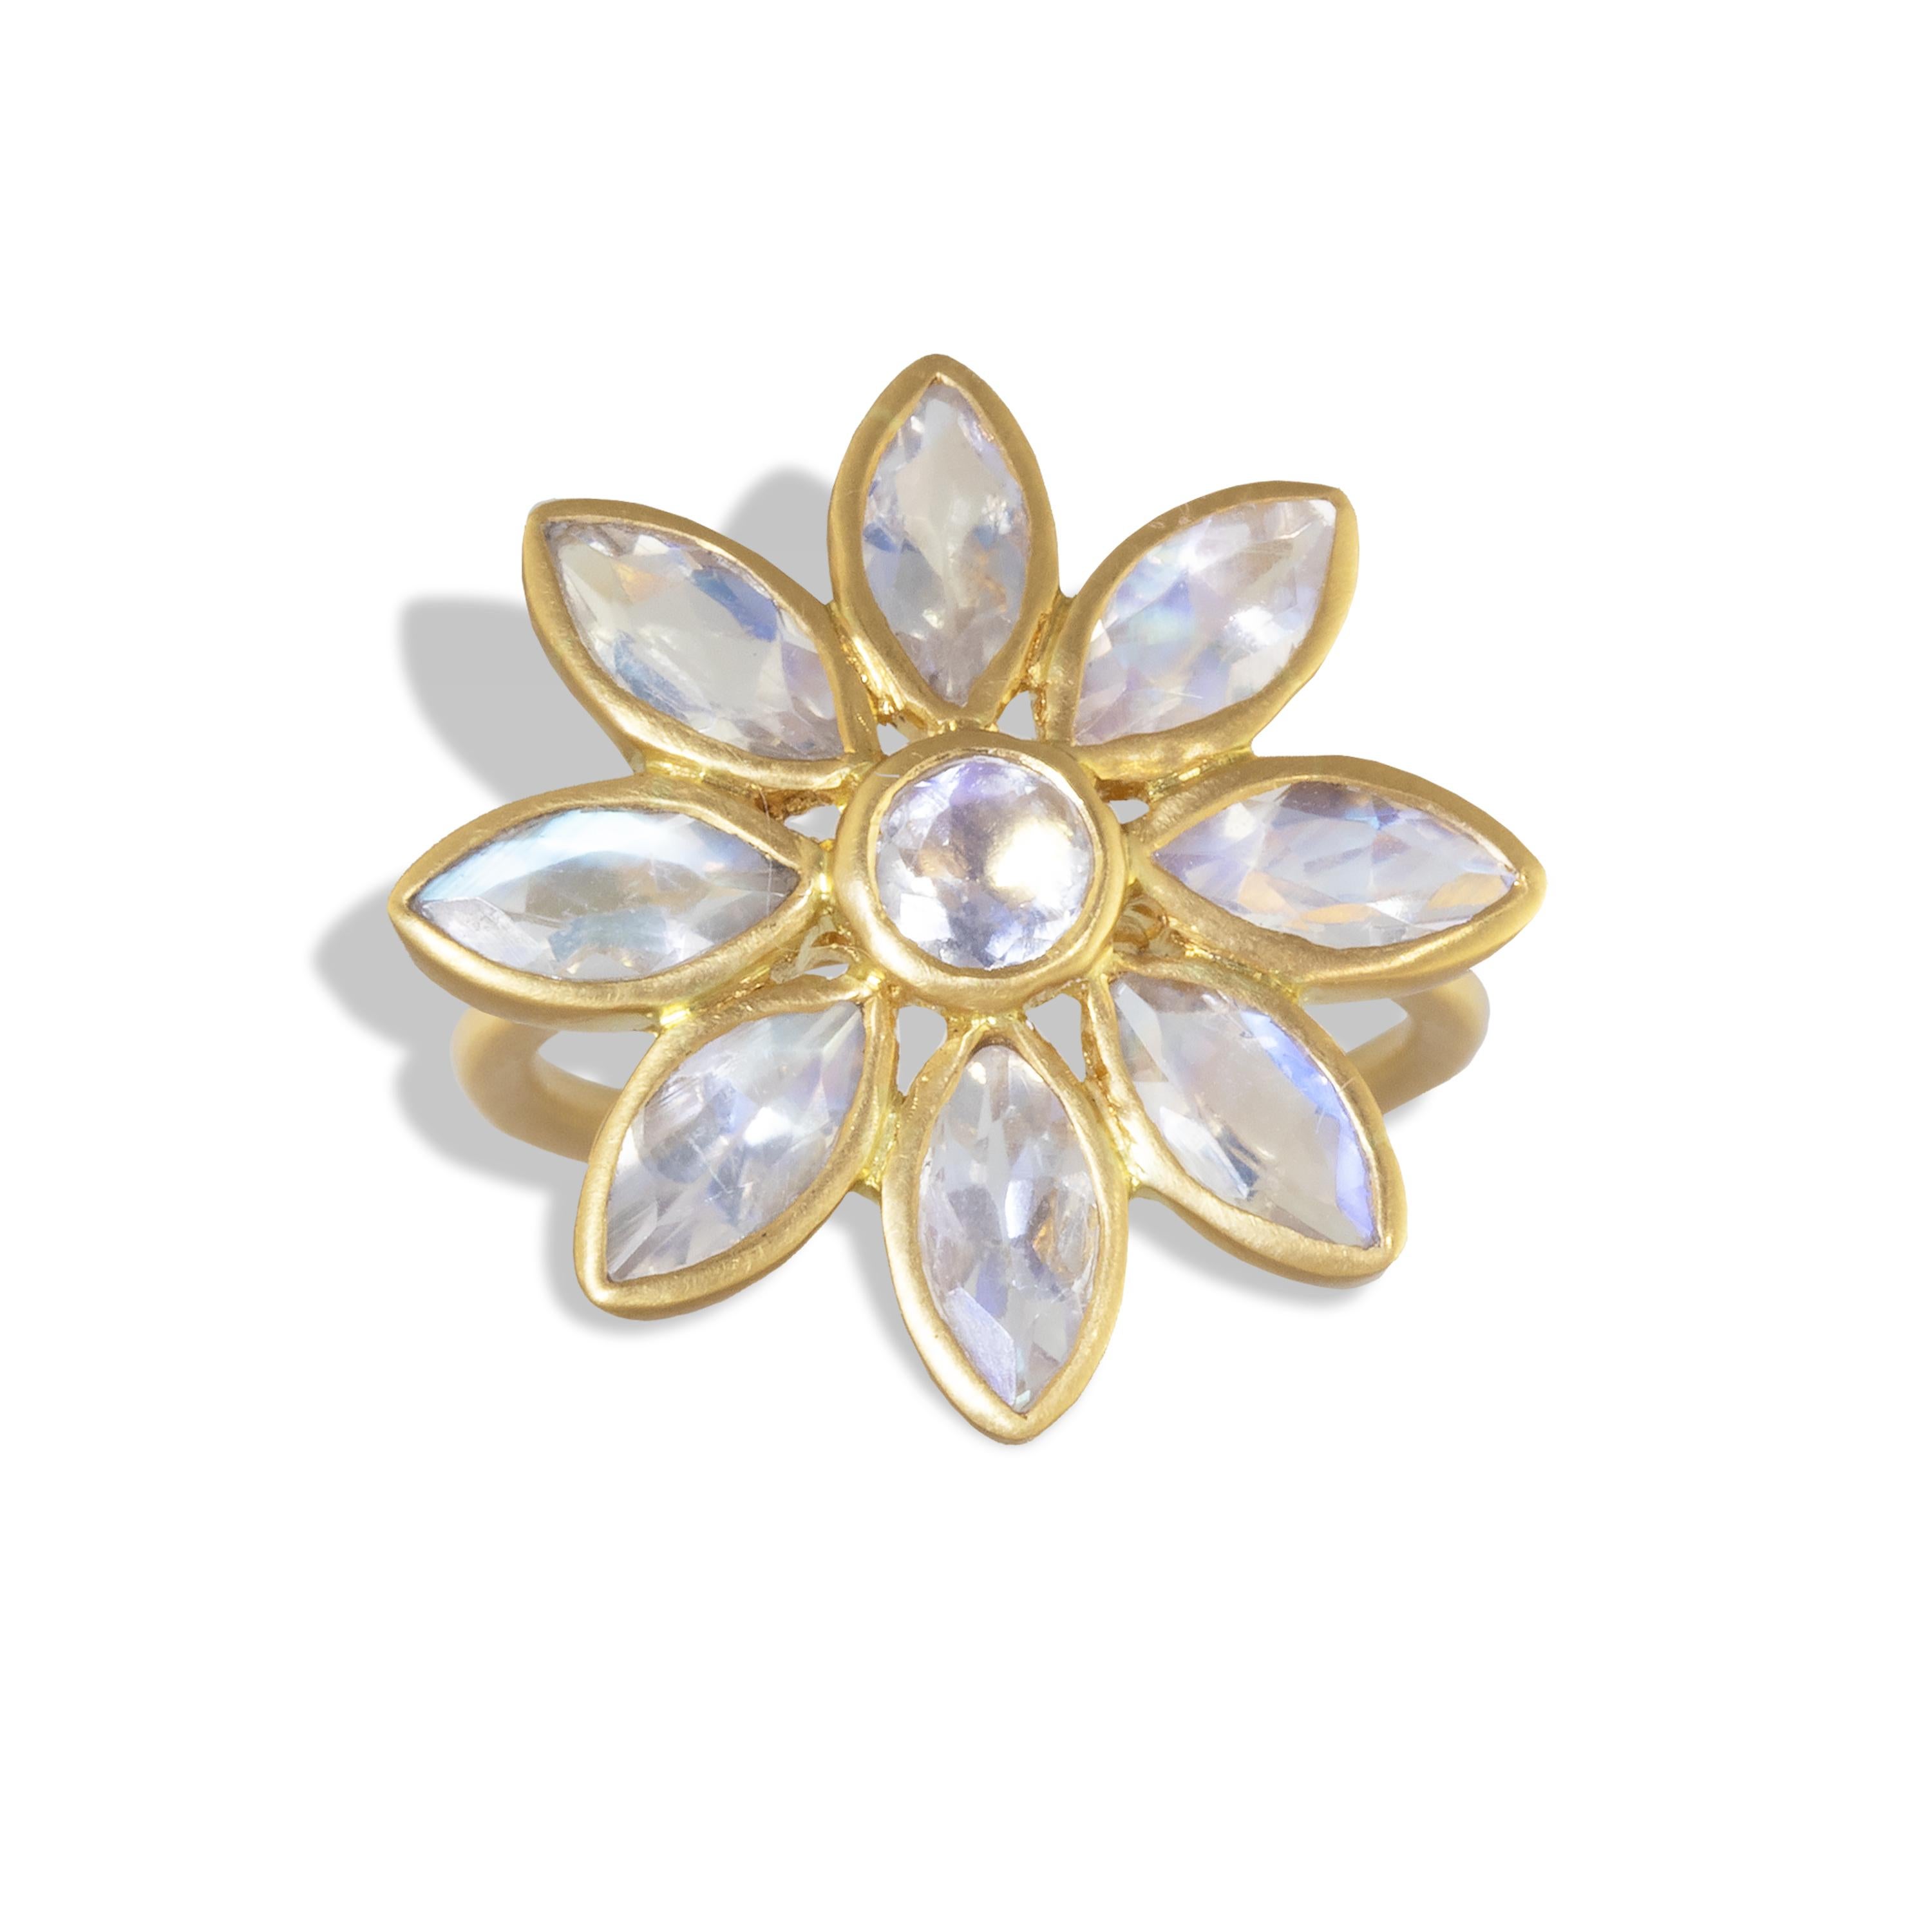 This dreamy flower ring featuring 4.75 carats of faceted marquise cut Rainbow Moonstone set in 20k matte yellow gold.  Simple and dramatic and set in 22k matte yellow gold. 
This ring is one of a kind. It was made by hand in our workshop in Jaipur,